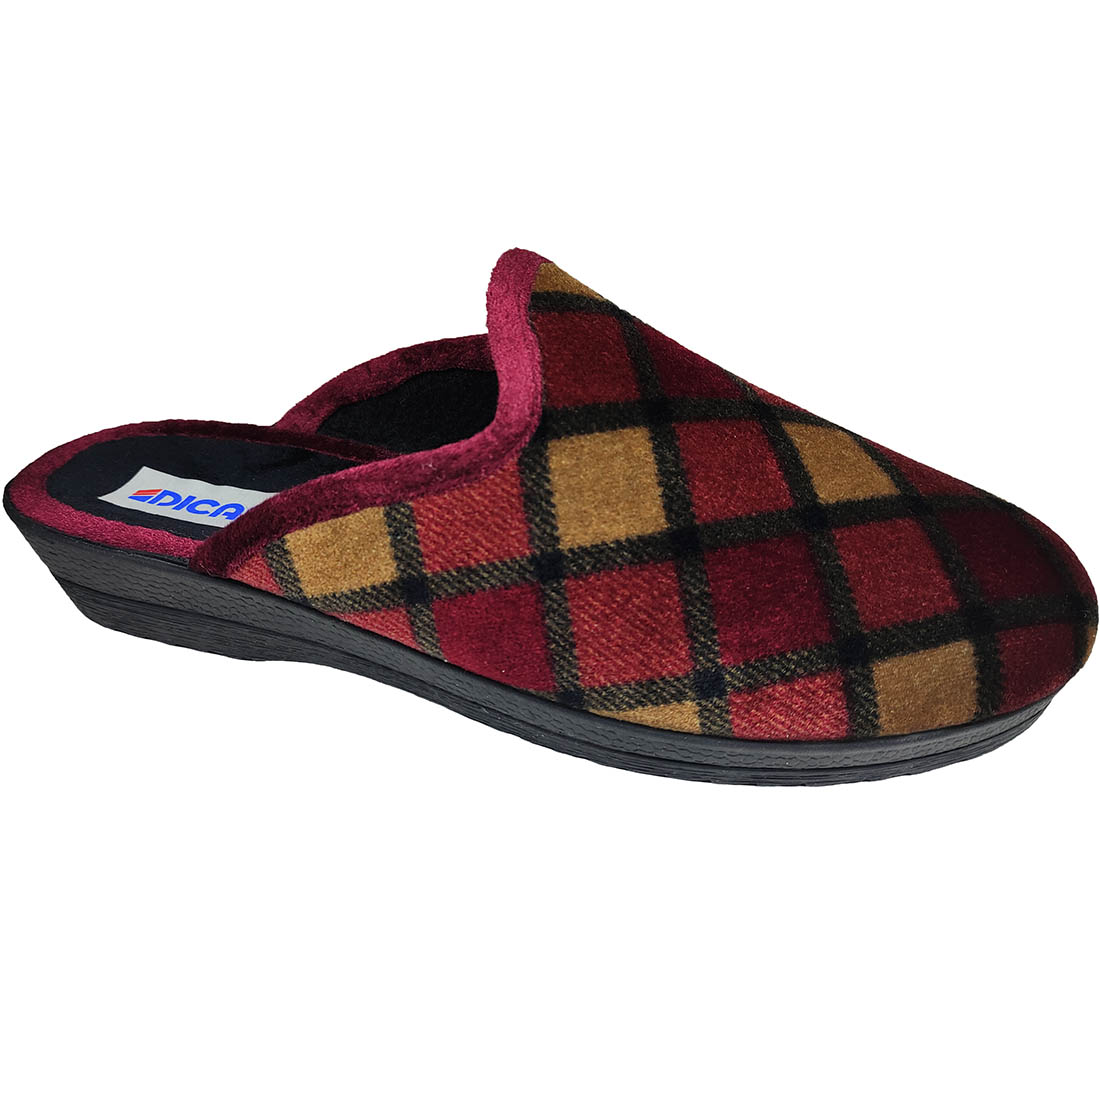 Womens Winter Slippers Dicas 4856 Bordeaux/Checkered